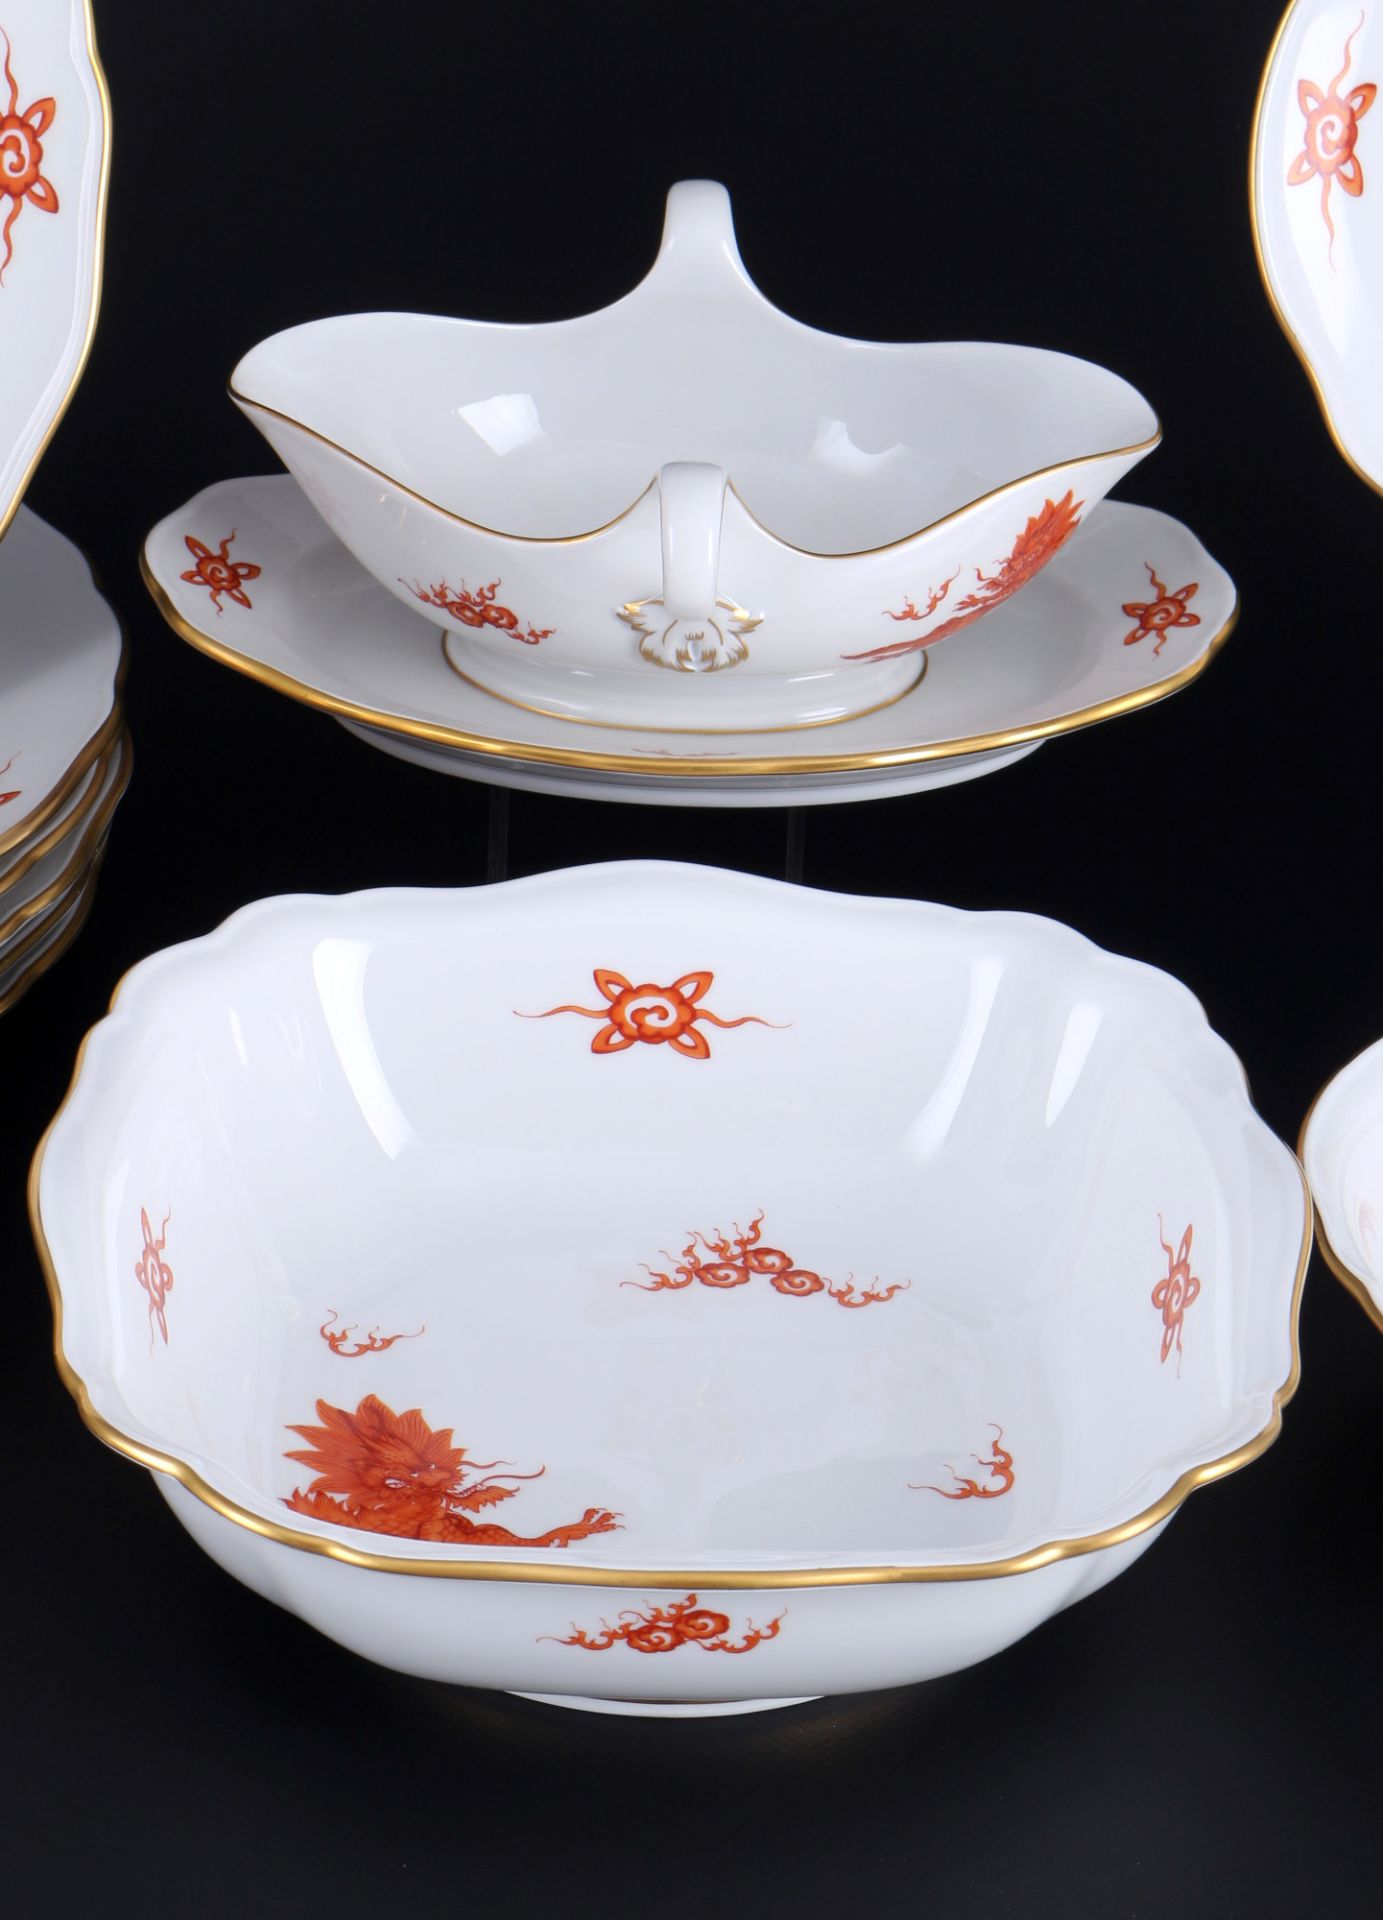 Meissen Red Ming Dragon dinner service for 6 persons 1st choice, Speiseservice für 6 Personen 1.Wahl - Image 3 of 5